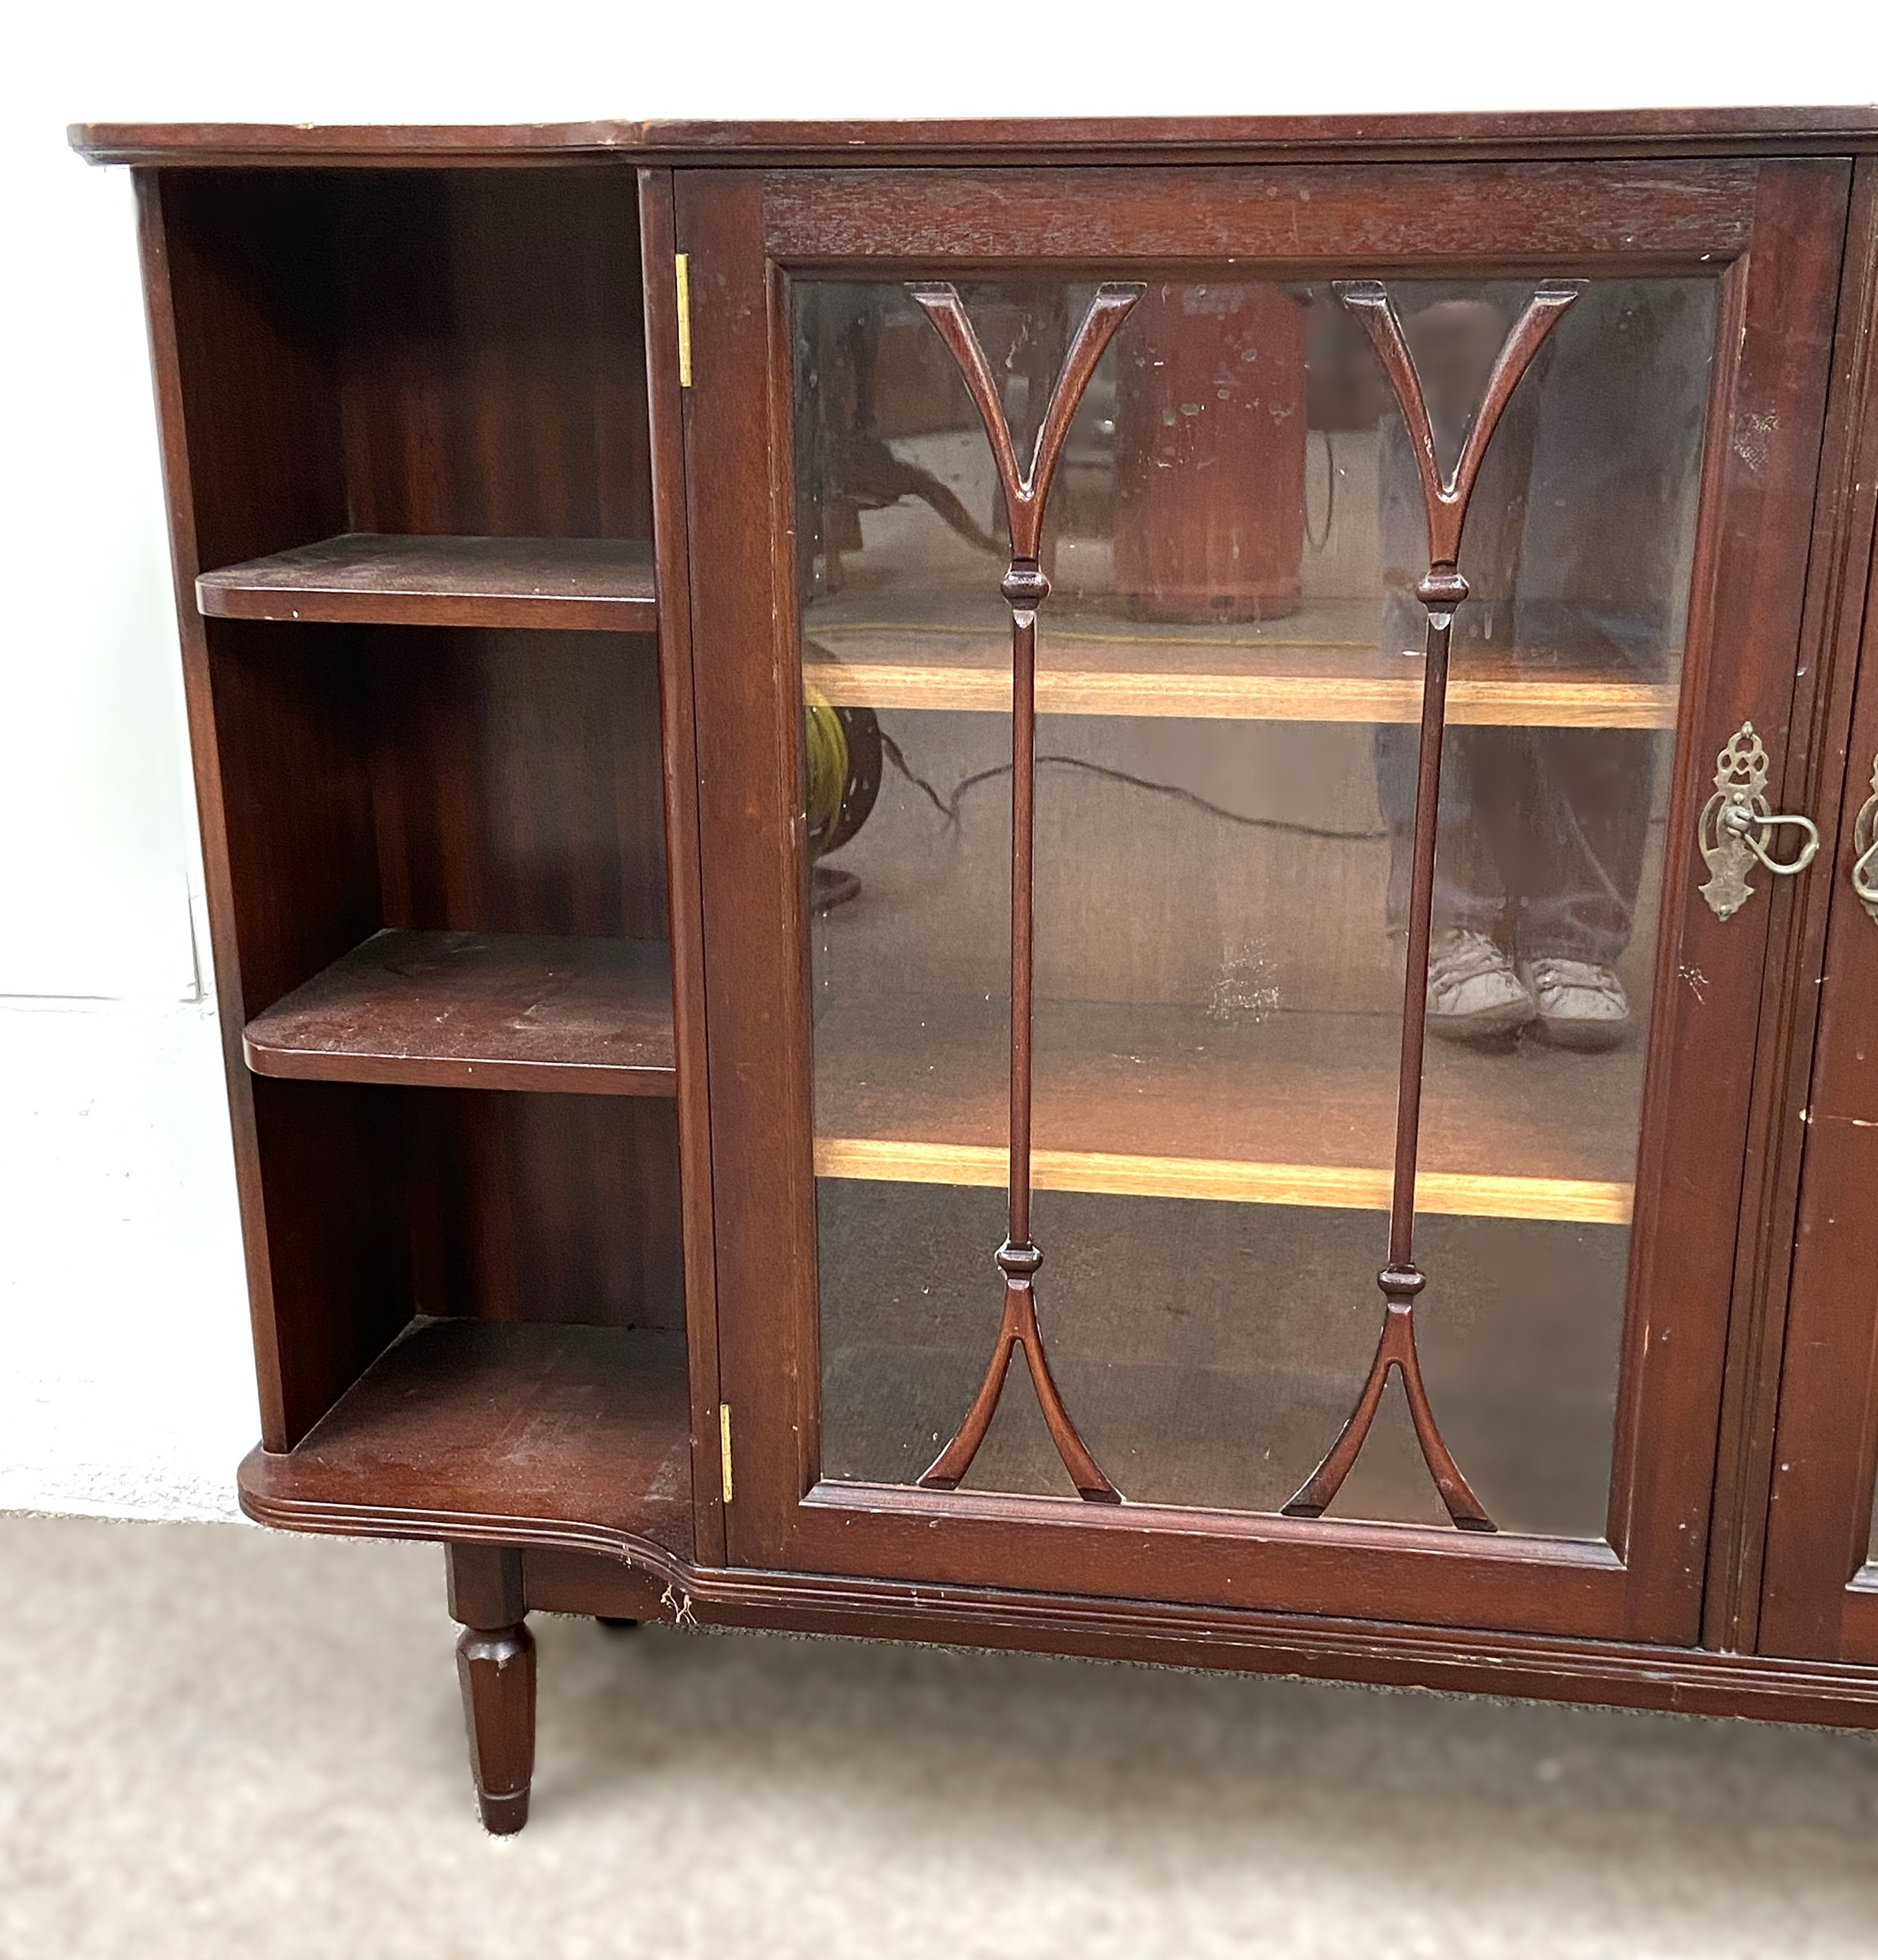 A Georgian style low bookcase, modern, with two glazed bookcase doors flanked by open shelves, - Image 2 of 3